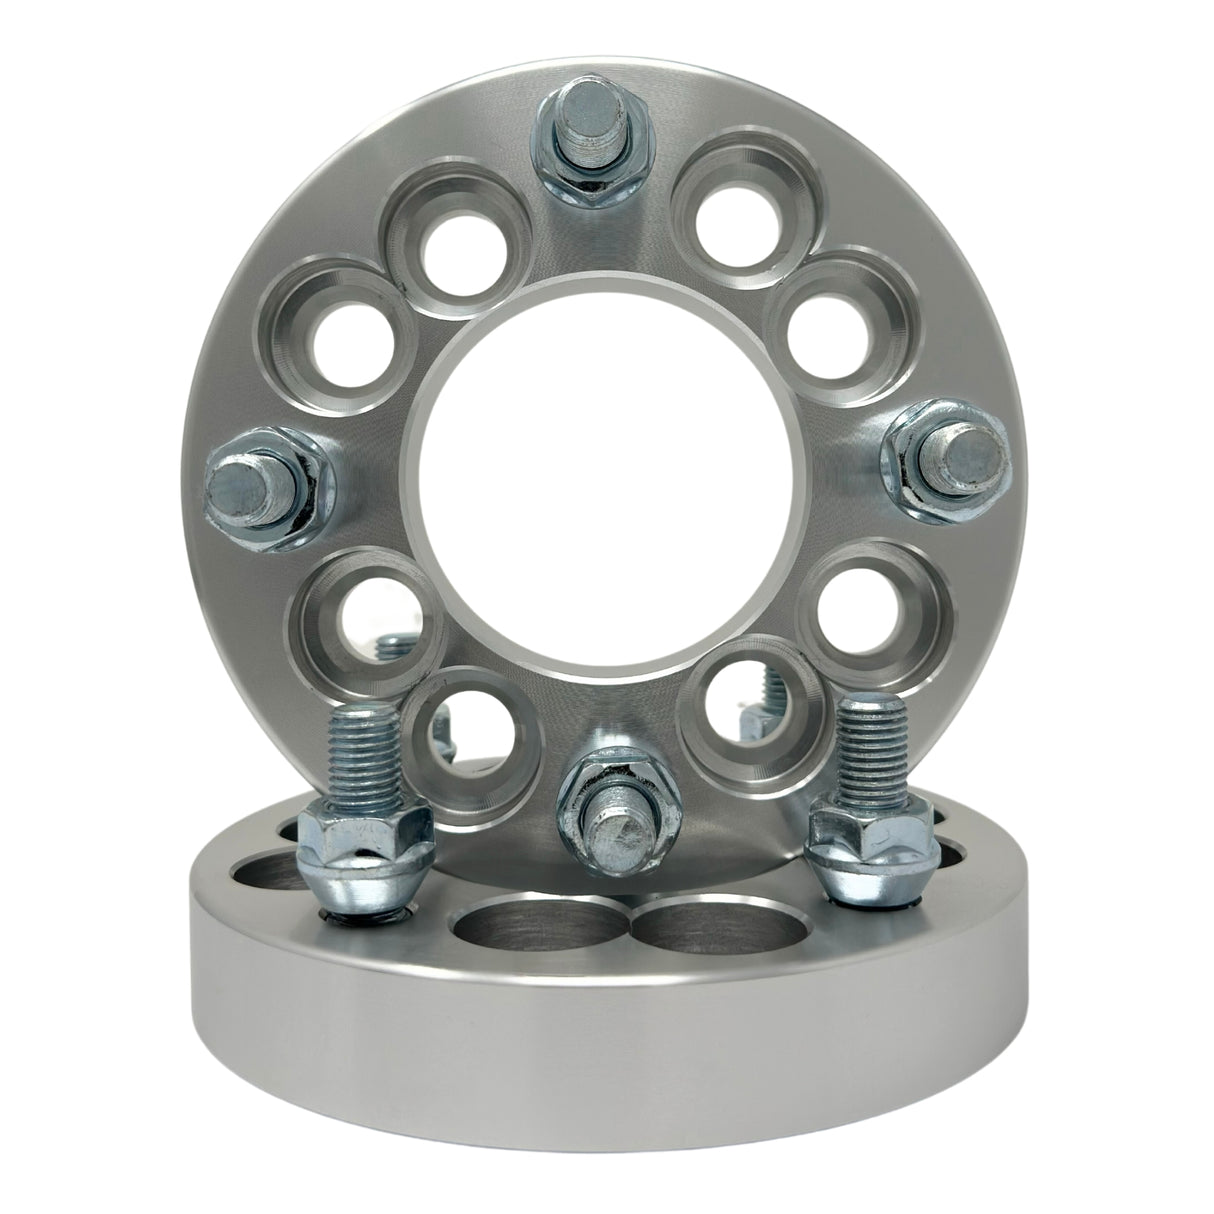 4x108 or 4x114.3 to 4x100 Wheel Adapters Universal Kit 1" Inch Thick (25mm) 12x1.5 Studs & Lug Nuts 71mm Center Bore For All 4 Lug Hub Clearance 4x4.25 or 4x4.5 to 4x4.5 Adapters Spacers